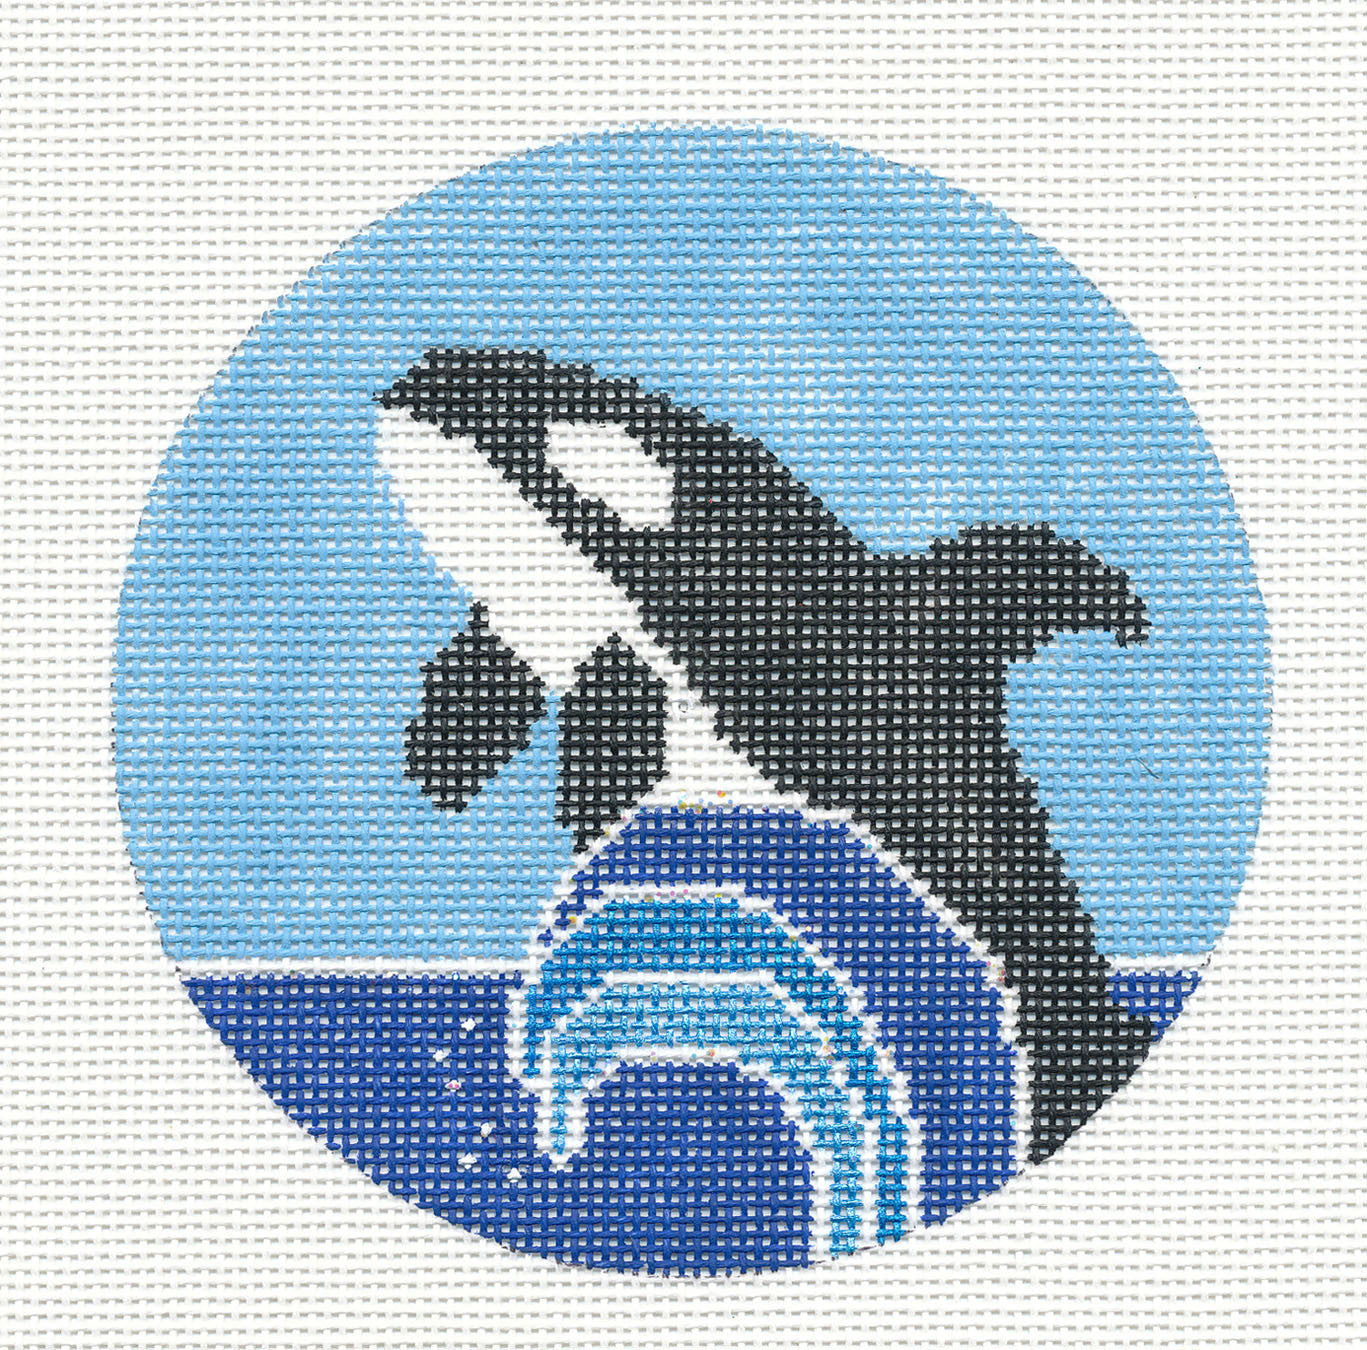 Round ~ Orca Killer Whale 4.25" handpainted Needlepoint Ornament by Christine from Danji Designs